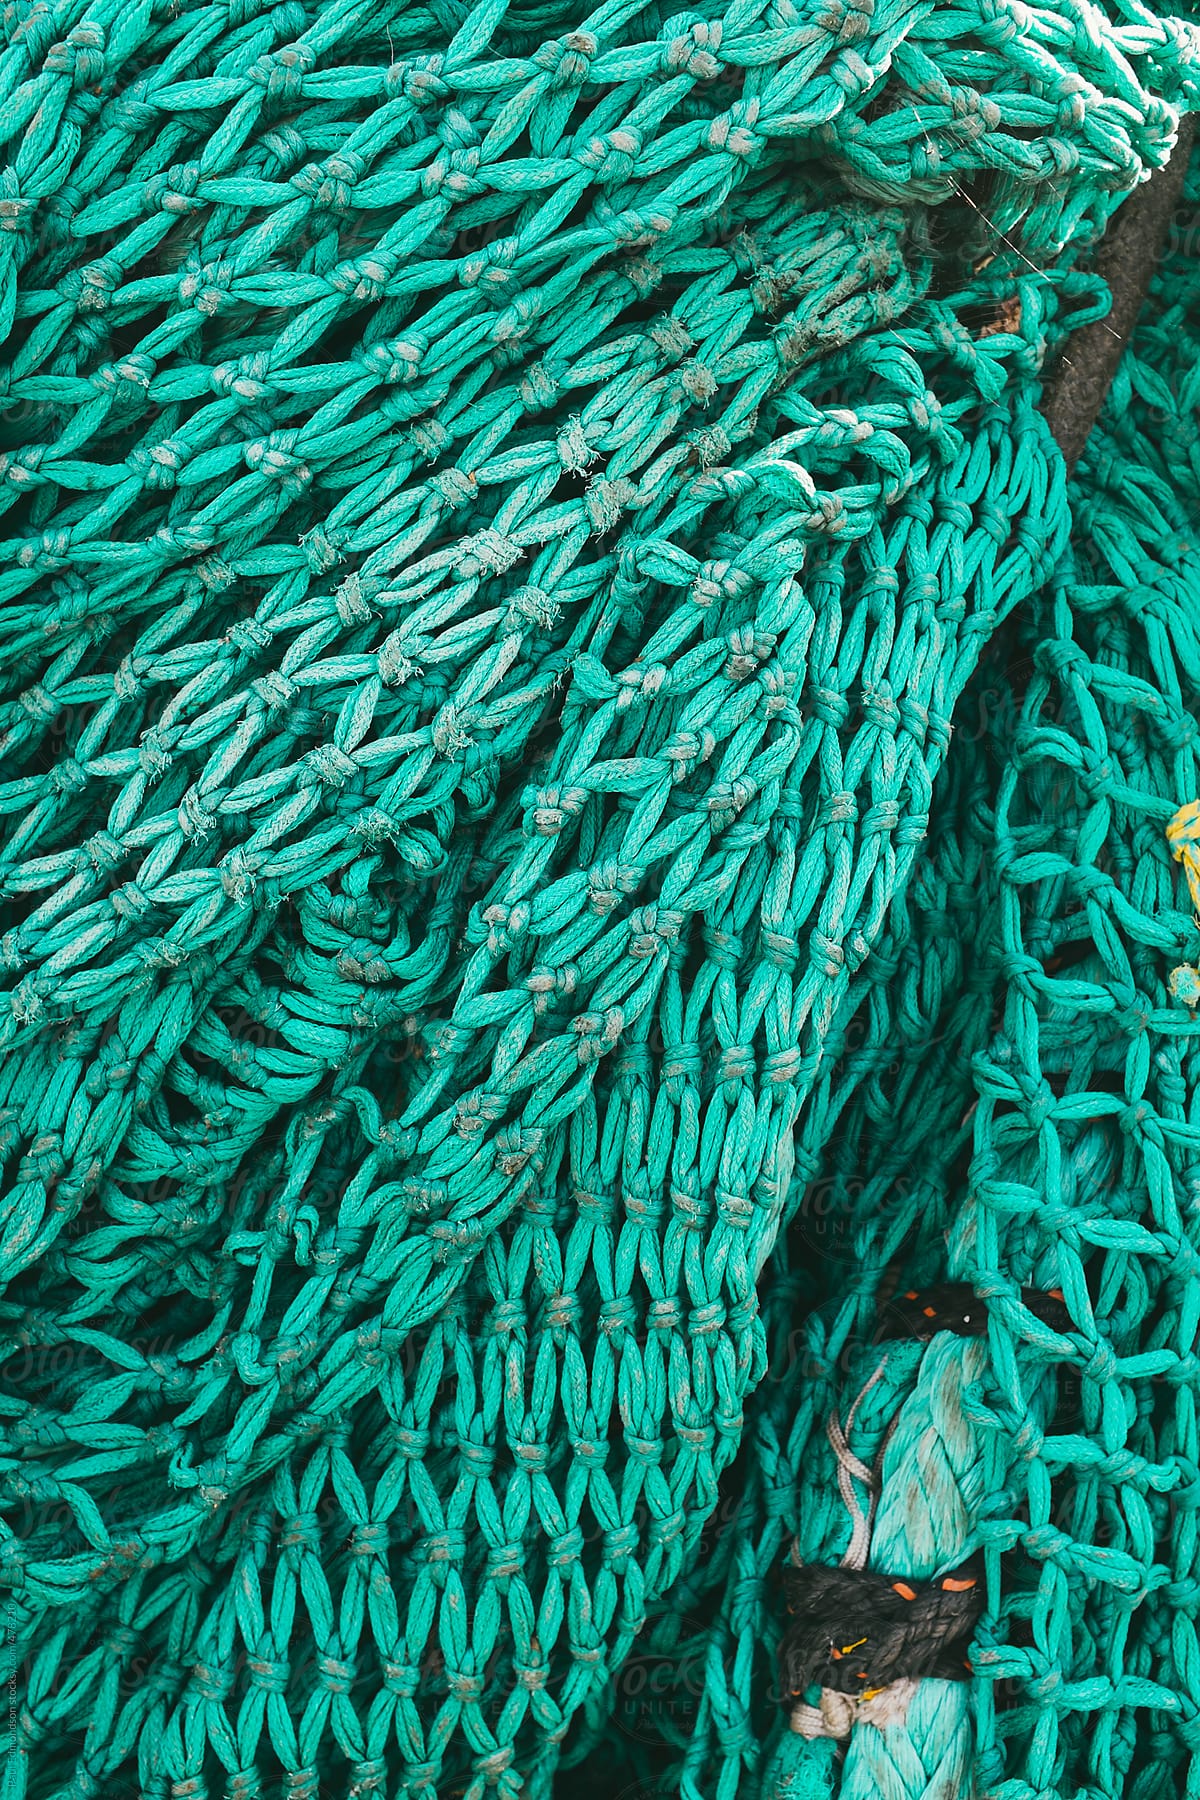 Pile Of Commercial Fishing Nets by Stocksy Contributor Rialto Images -  Stocksy